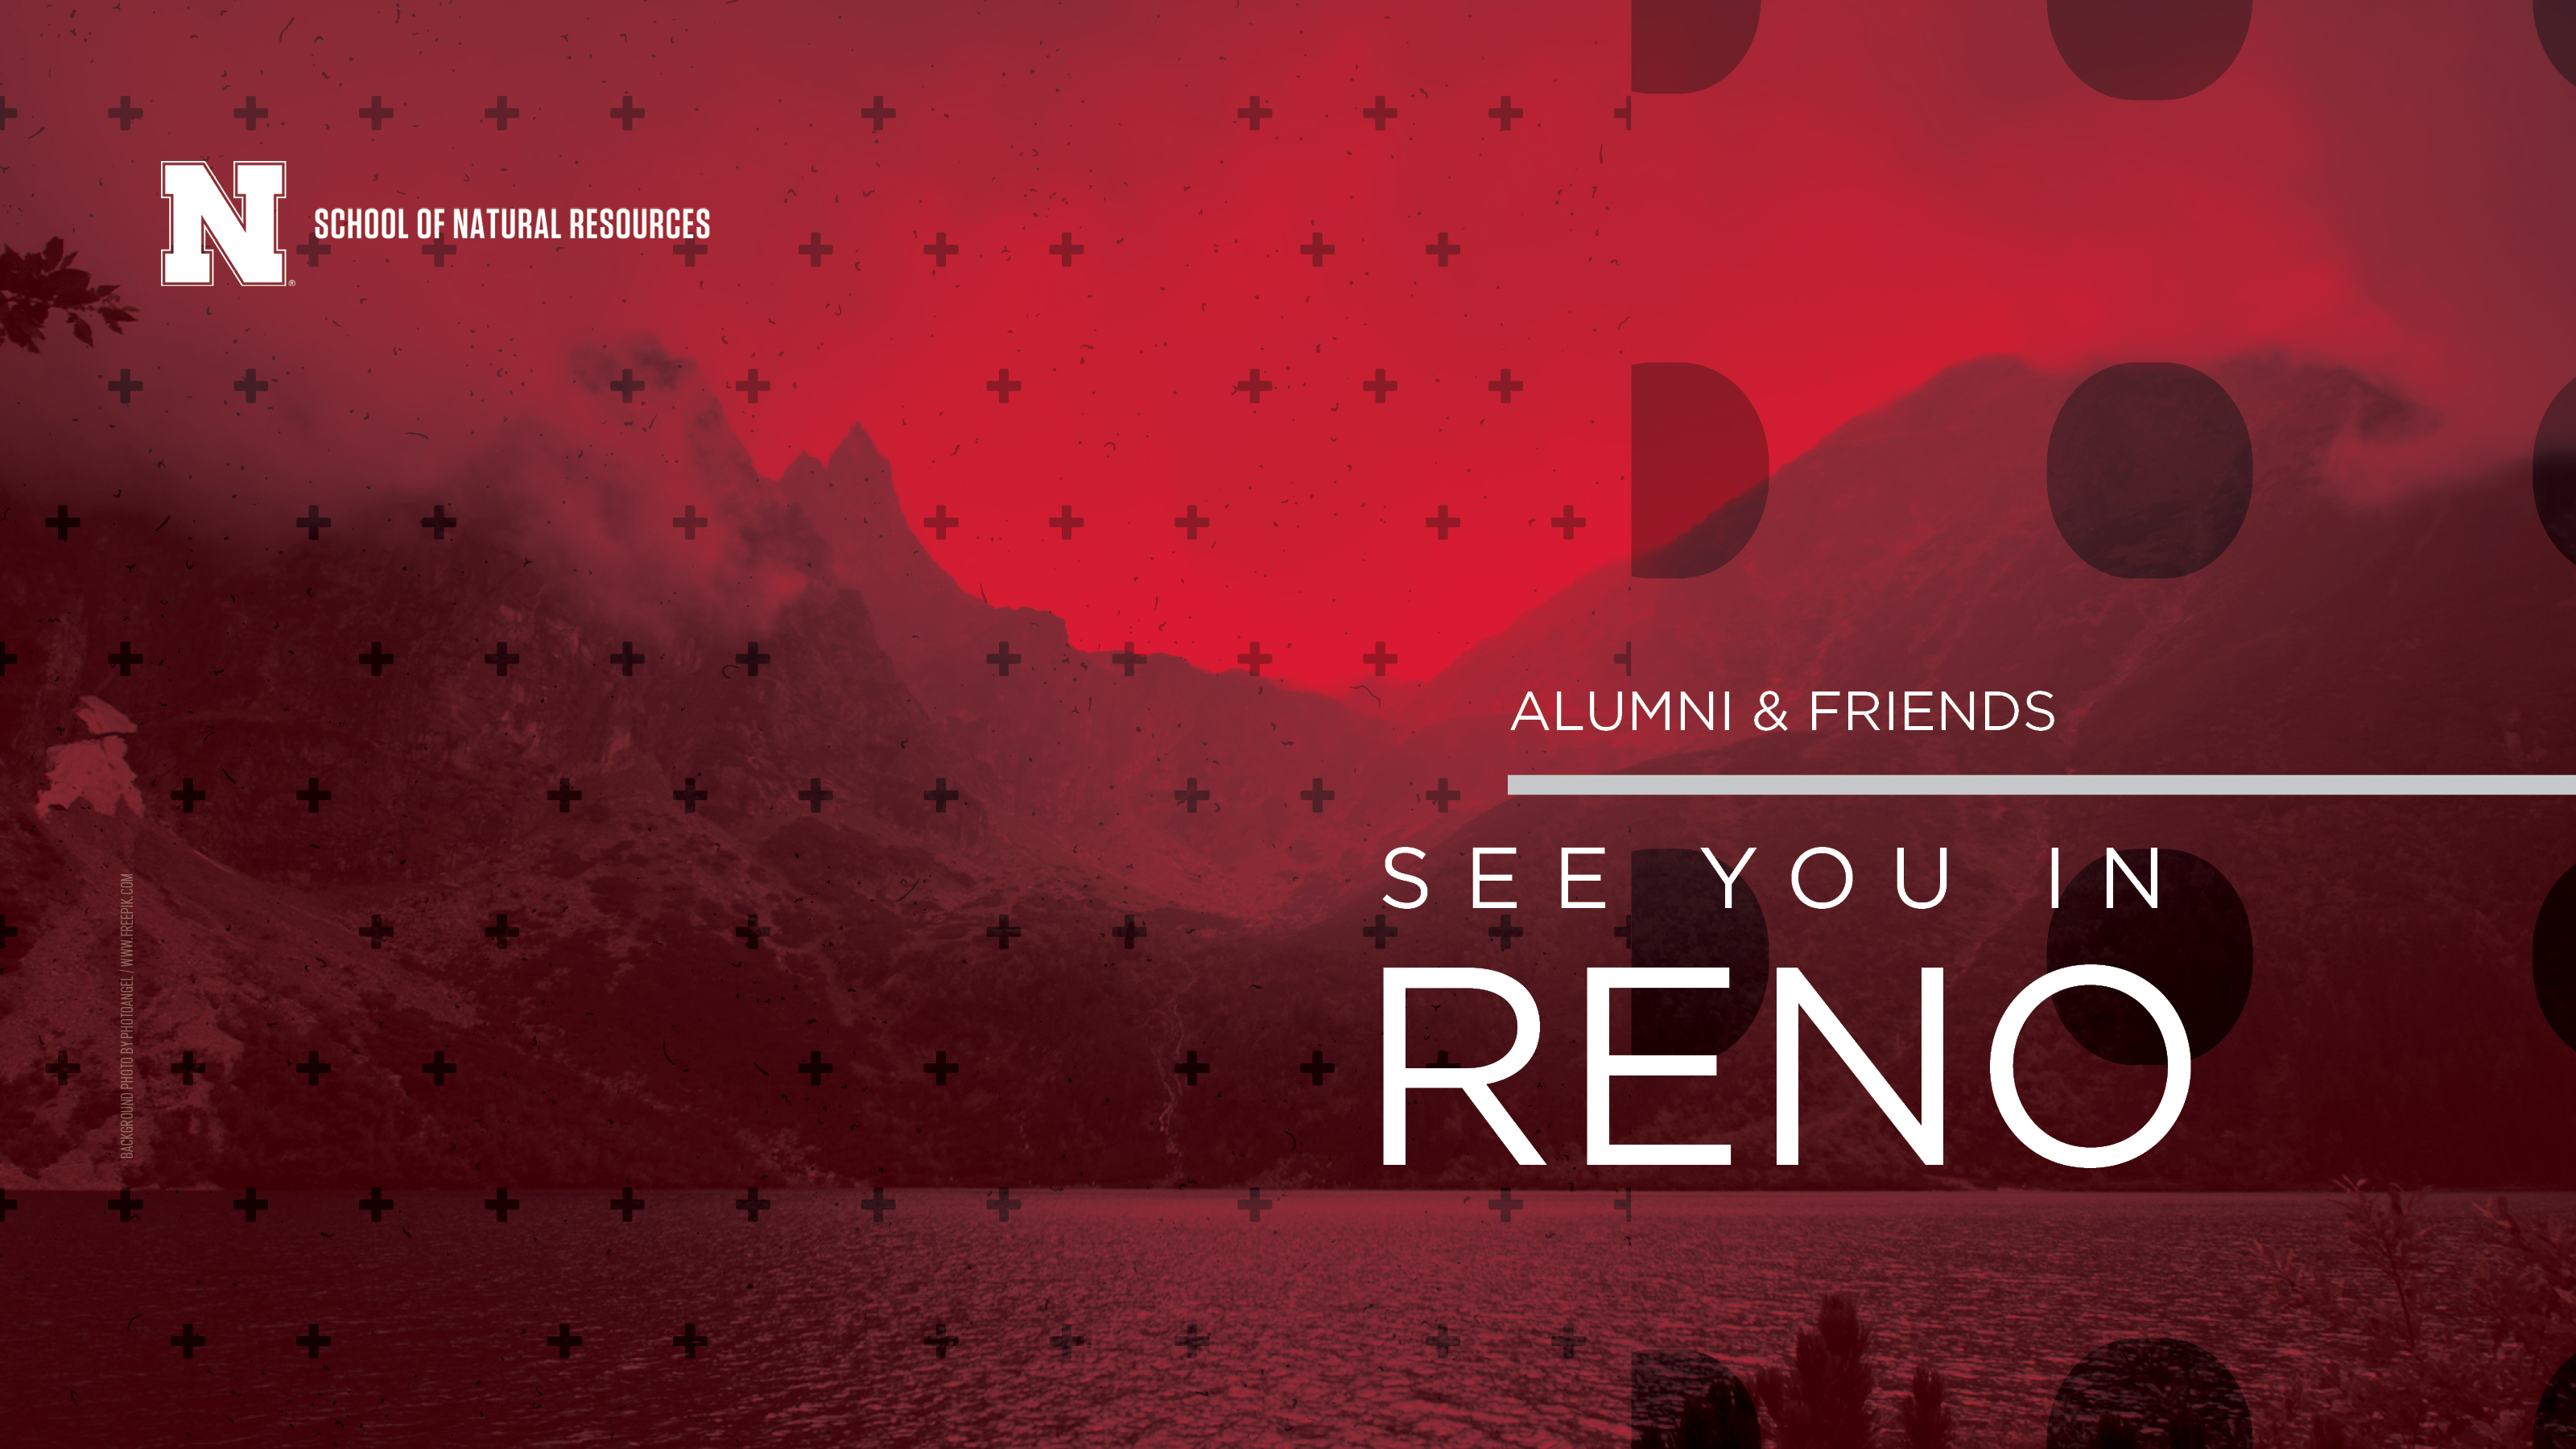 SNR is planning an alumni event for Oct. 2, 2019, in Reno.